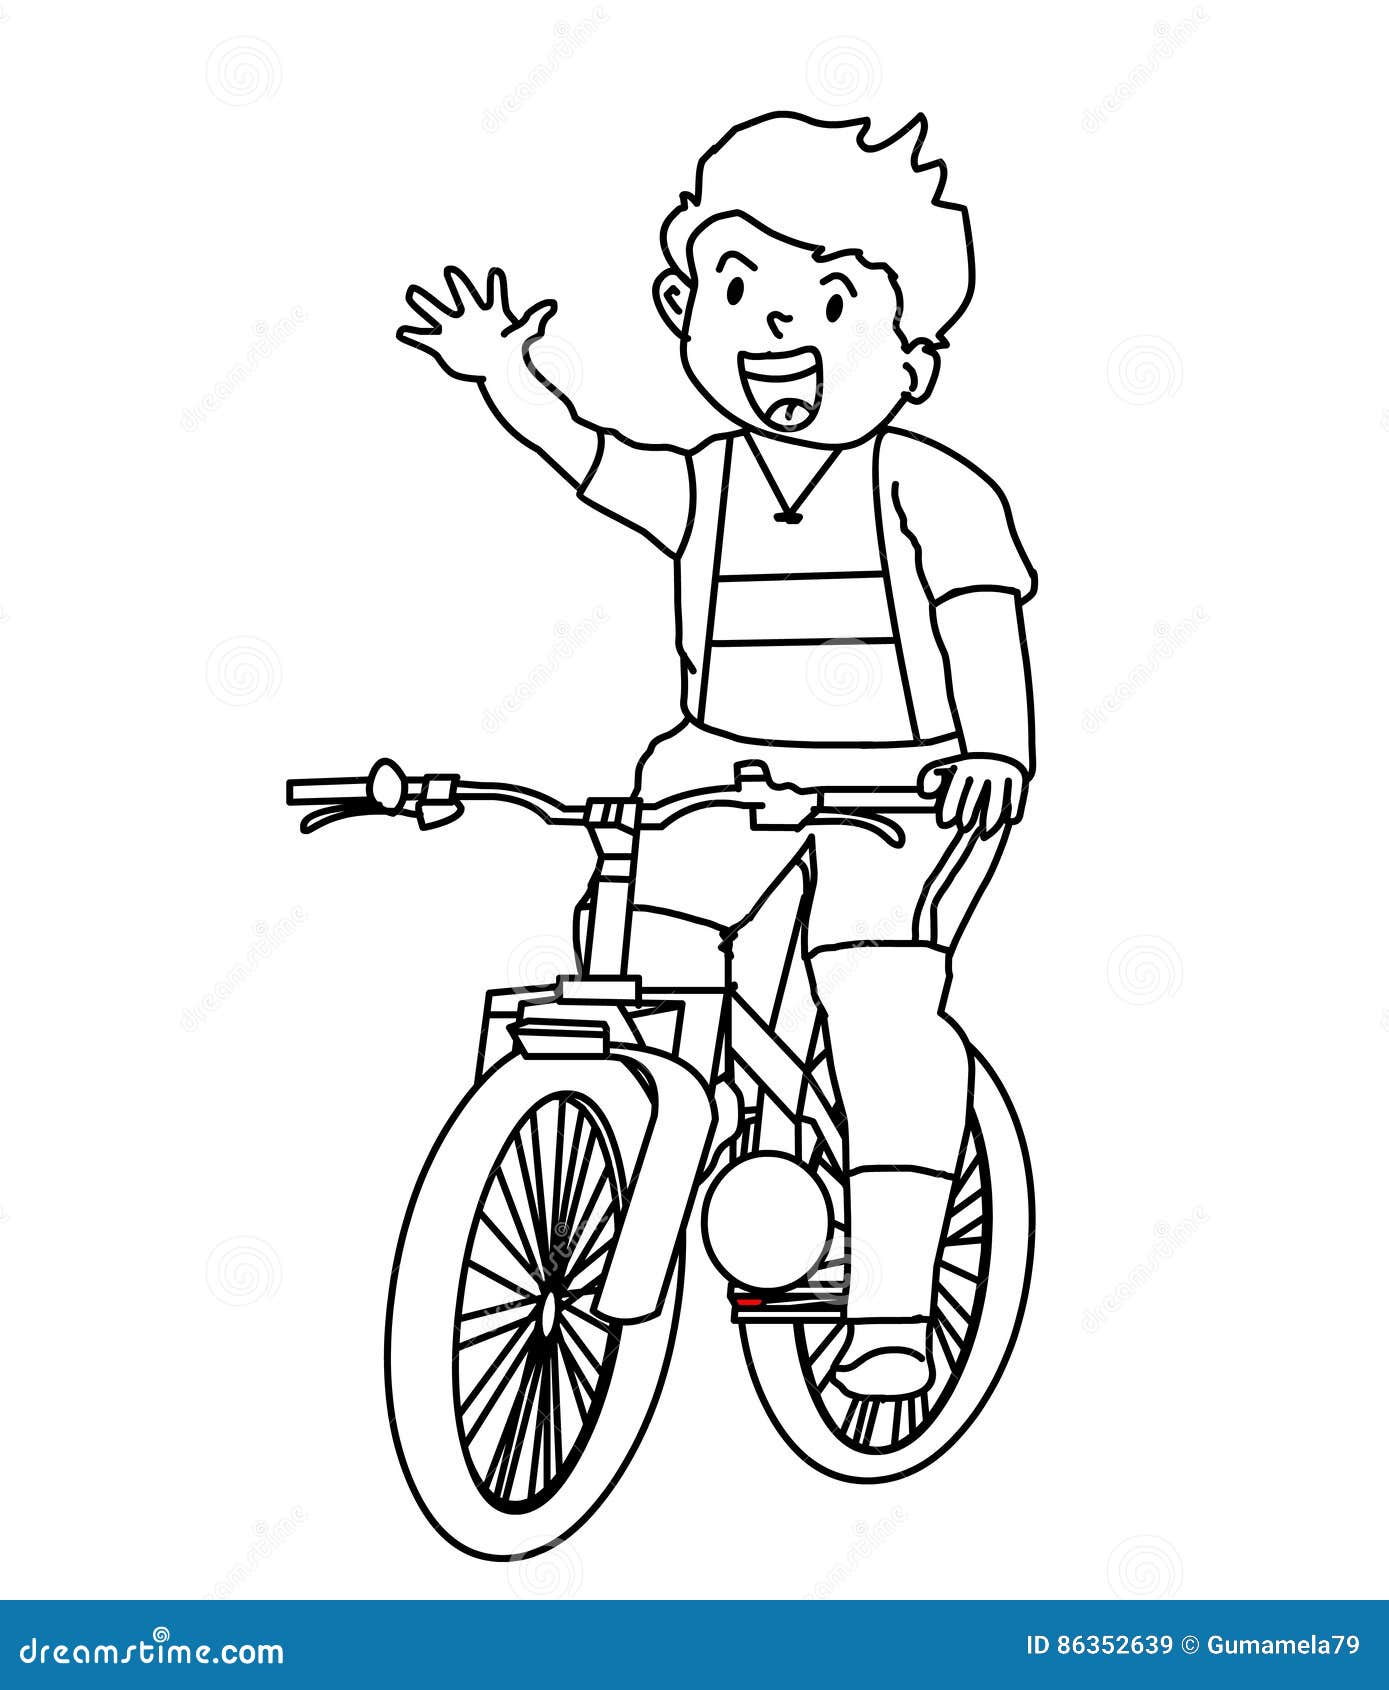 Kid In Bicycle Coloring Page Stock Illustration - Illustration of